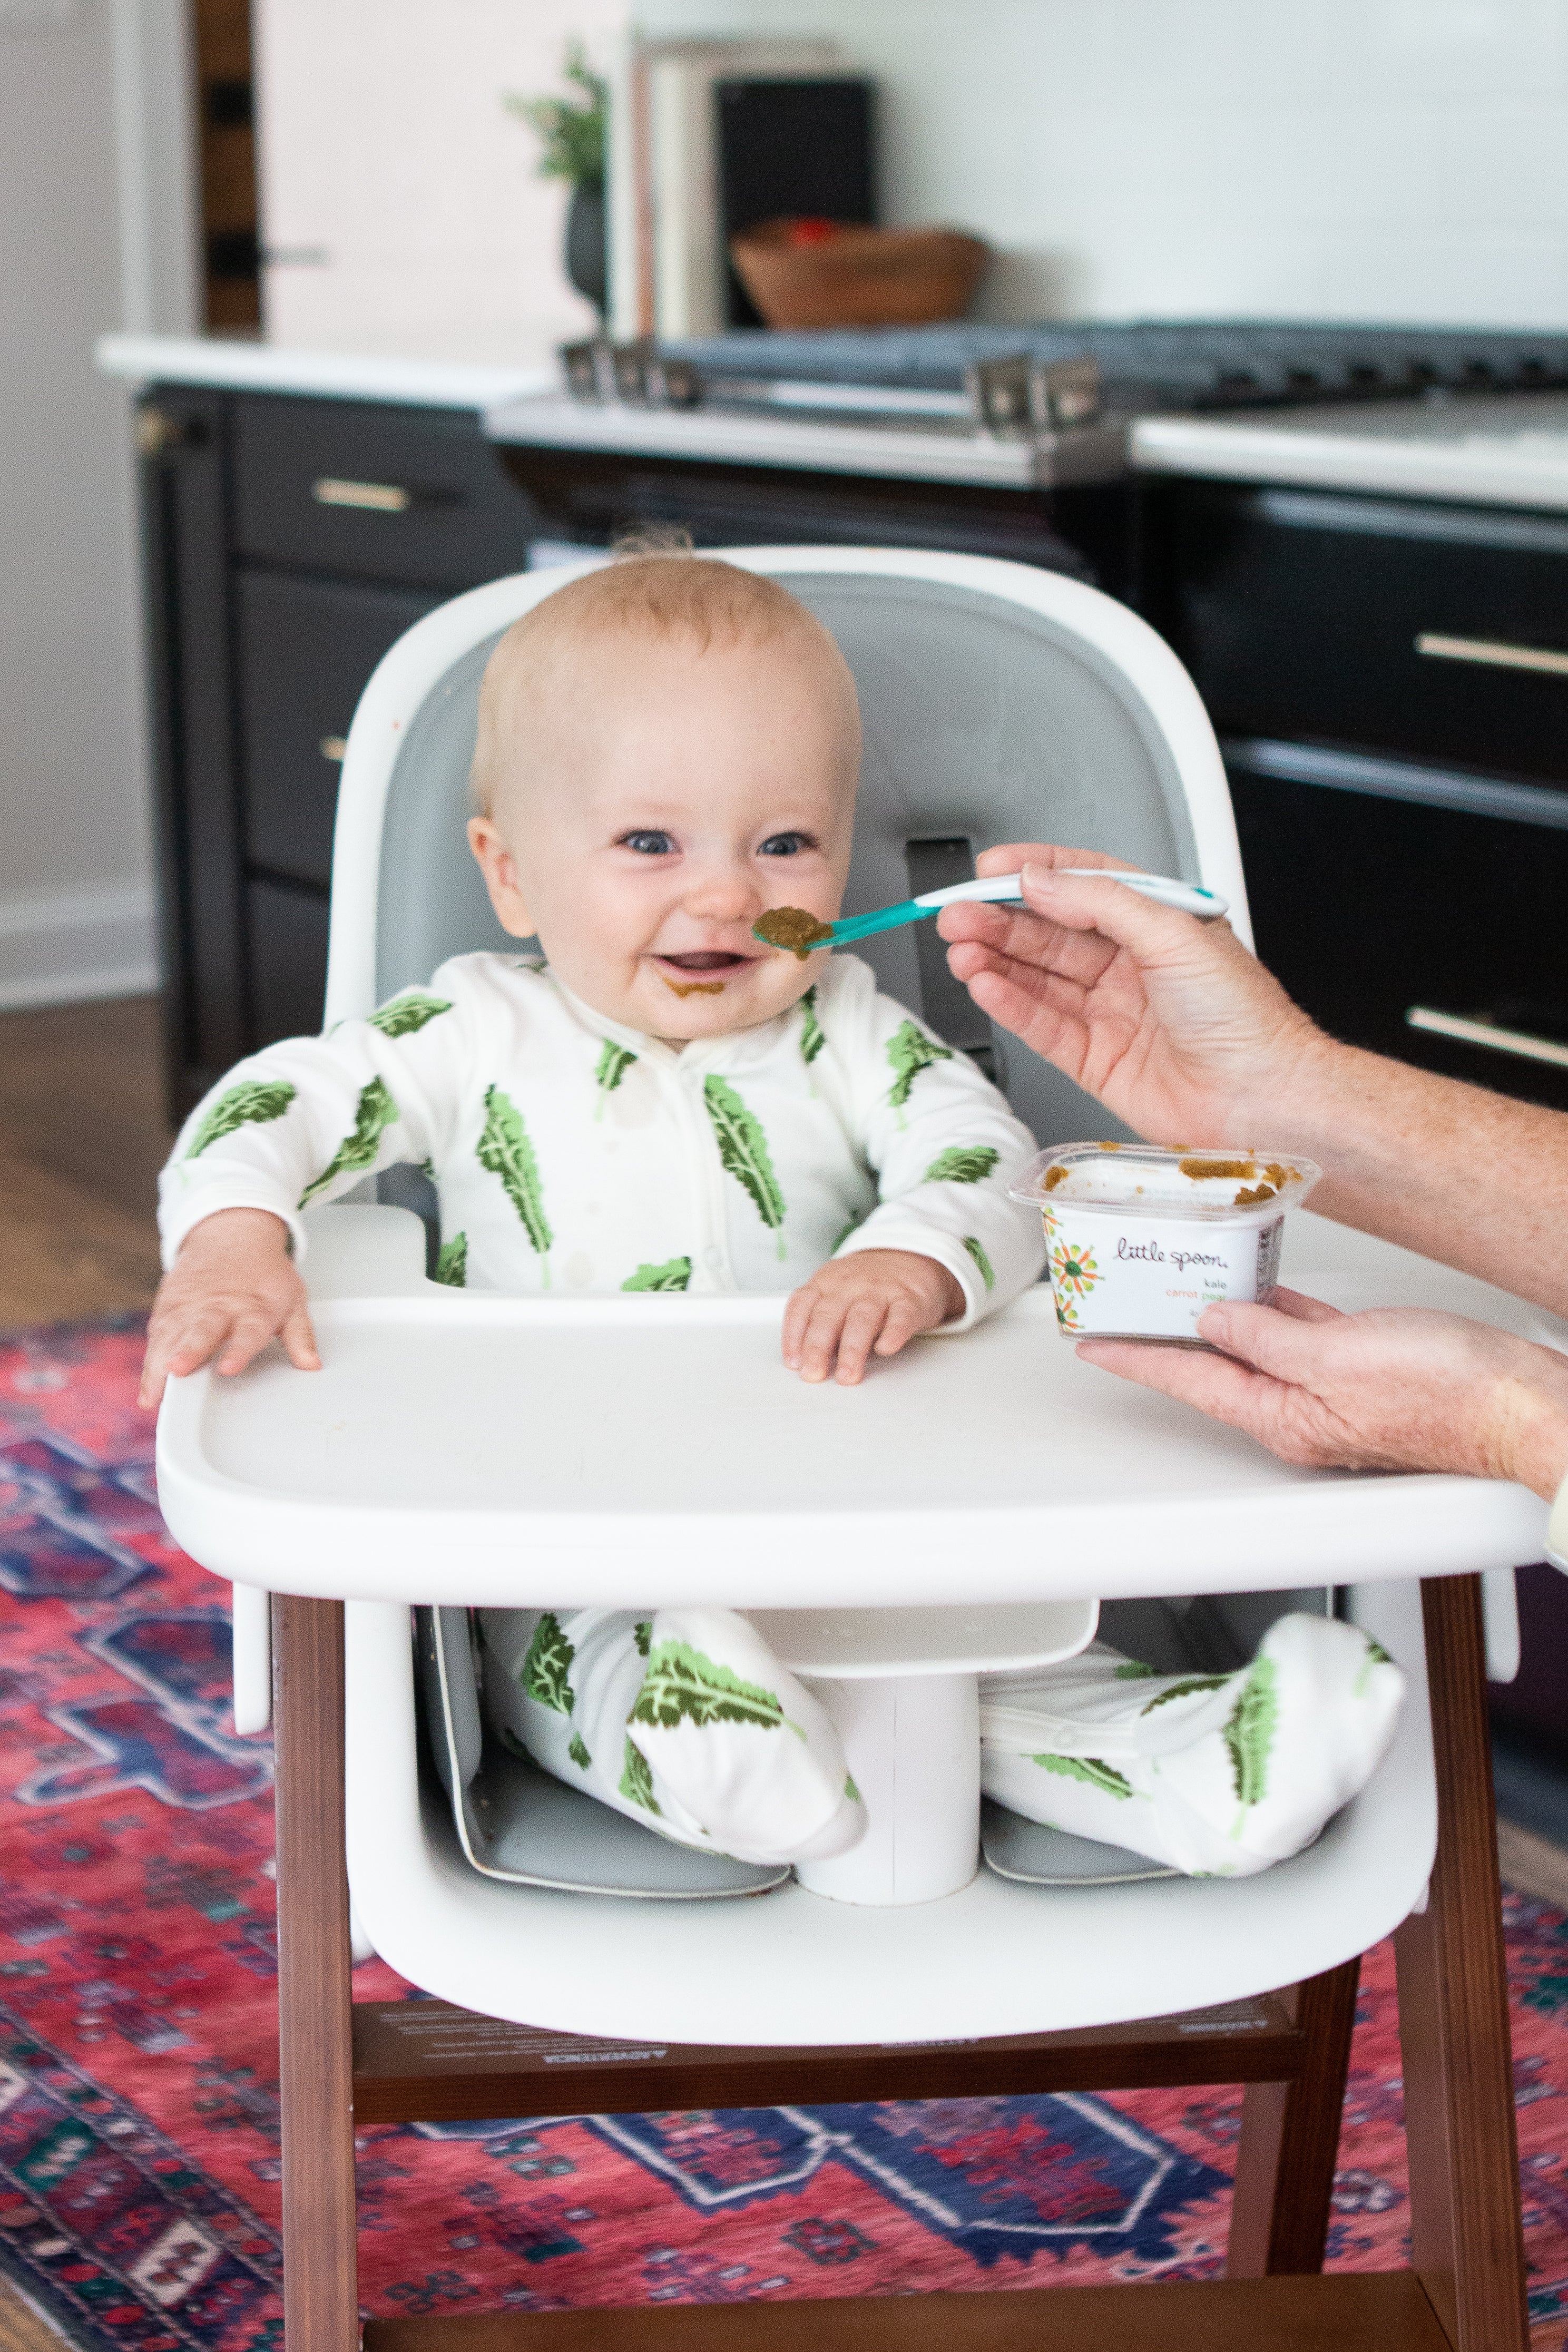 6 Helpful Products for Introducing Solid Foods